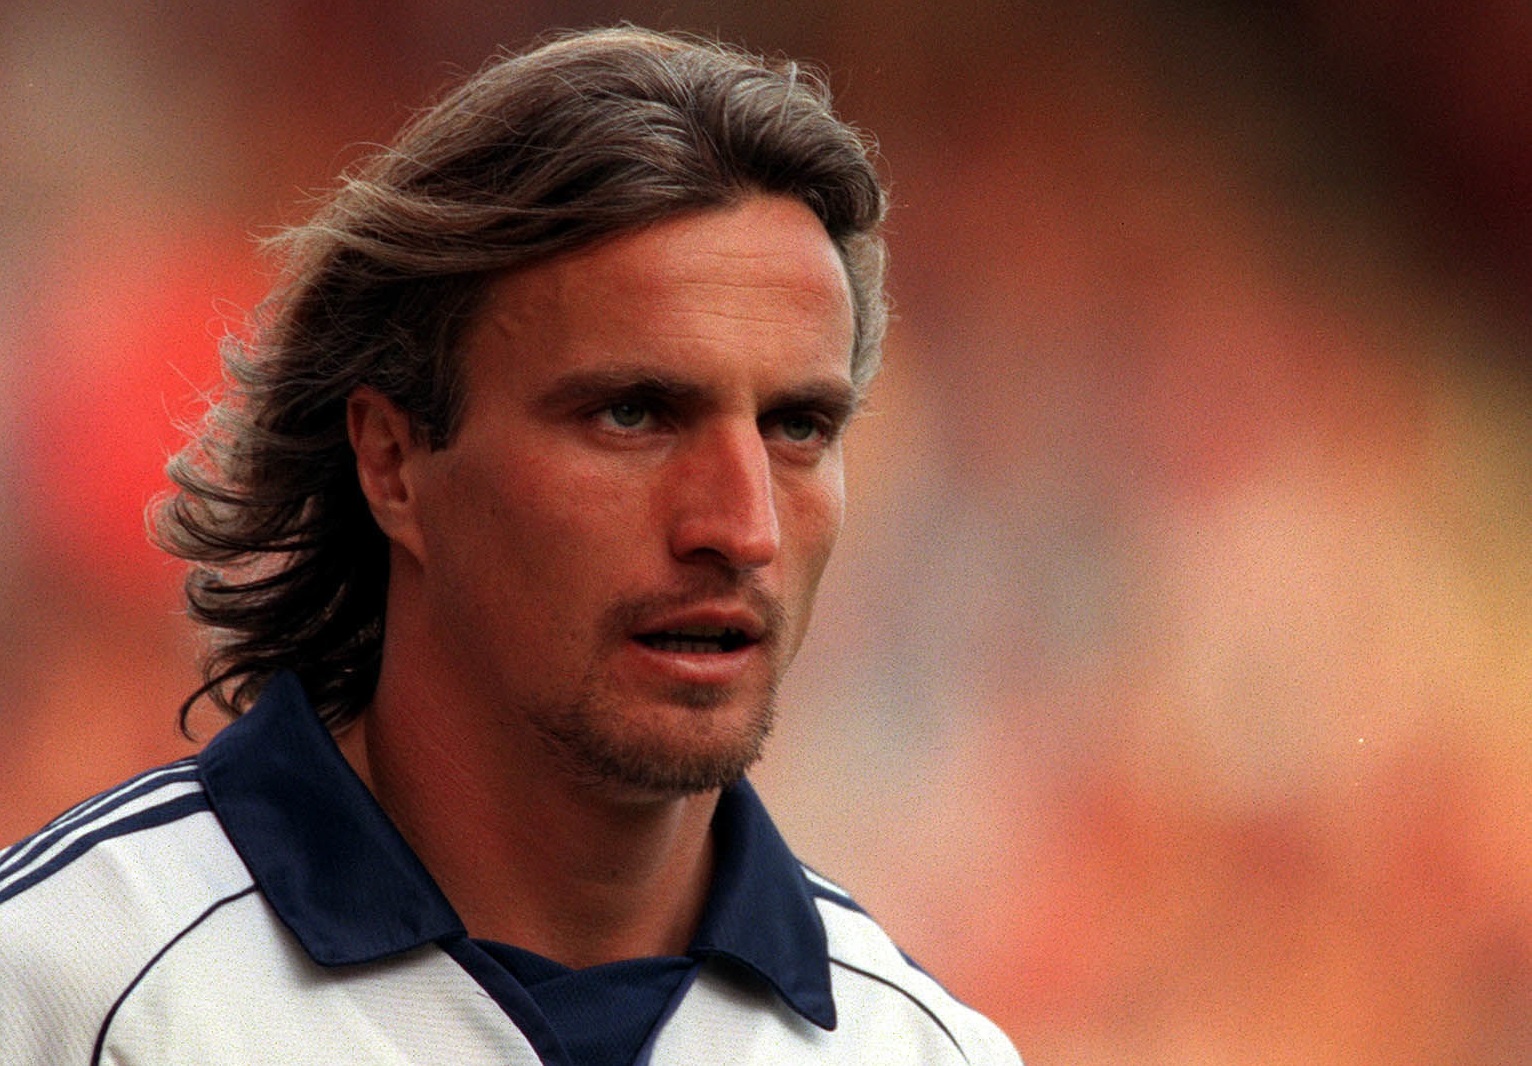 CardsChat Interview: David Ginola Goes from Soccer Star to PokerStars